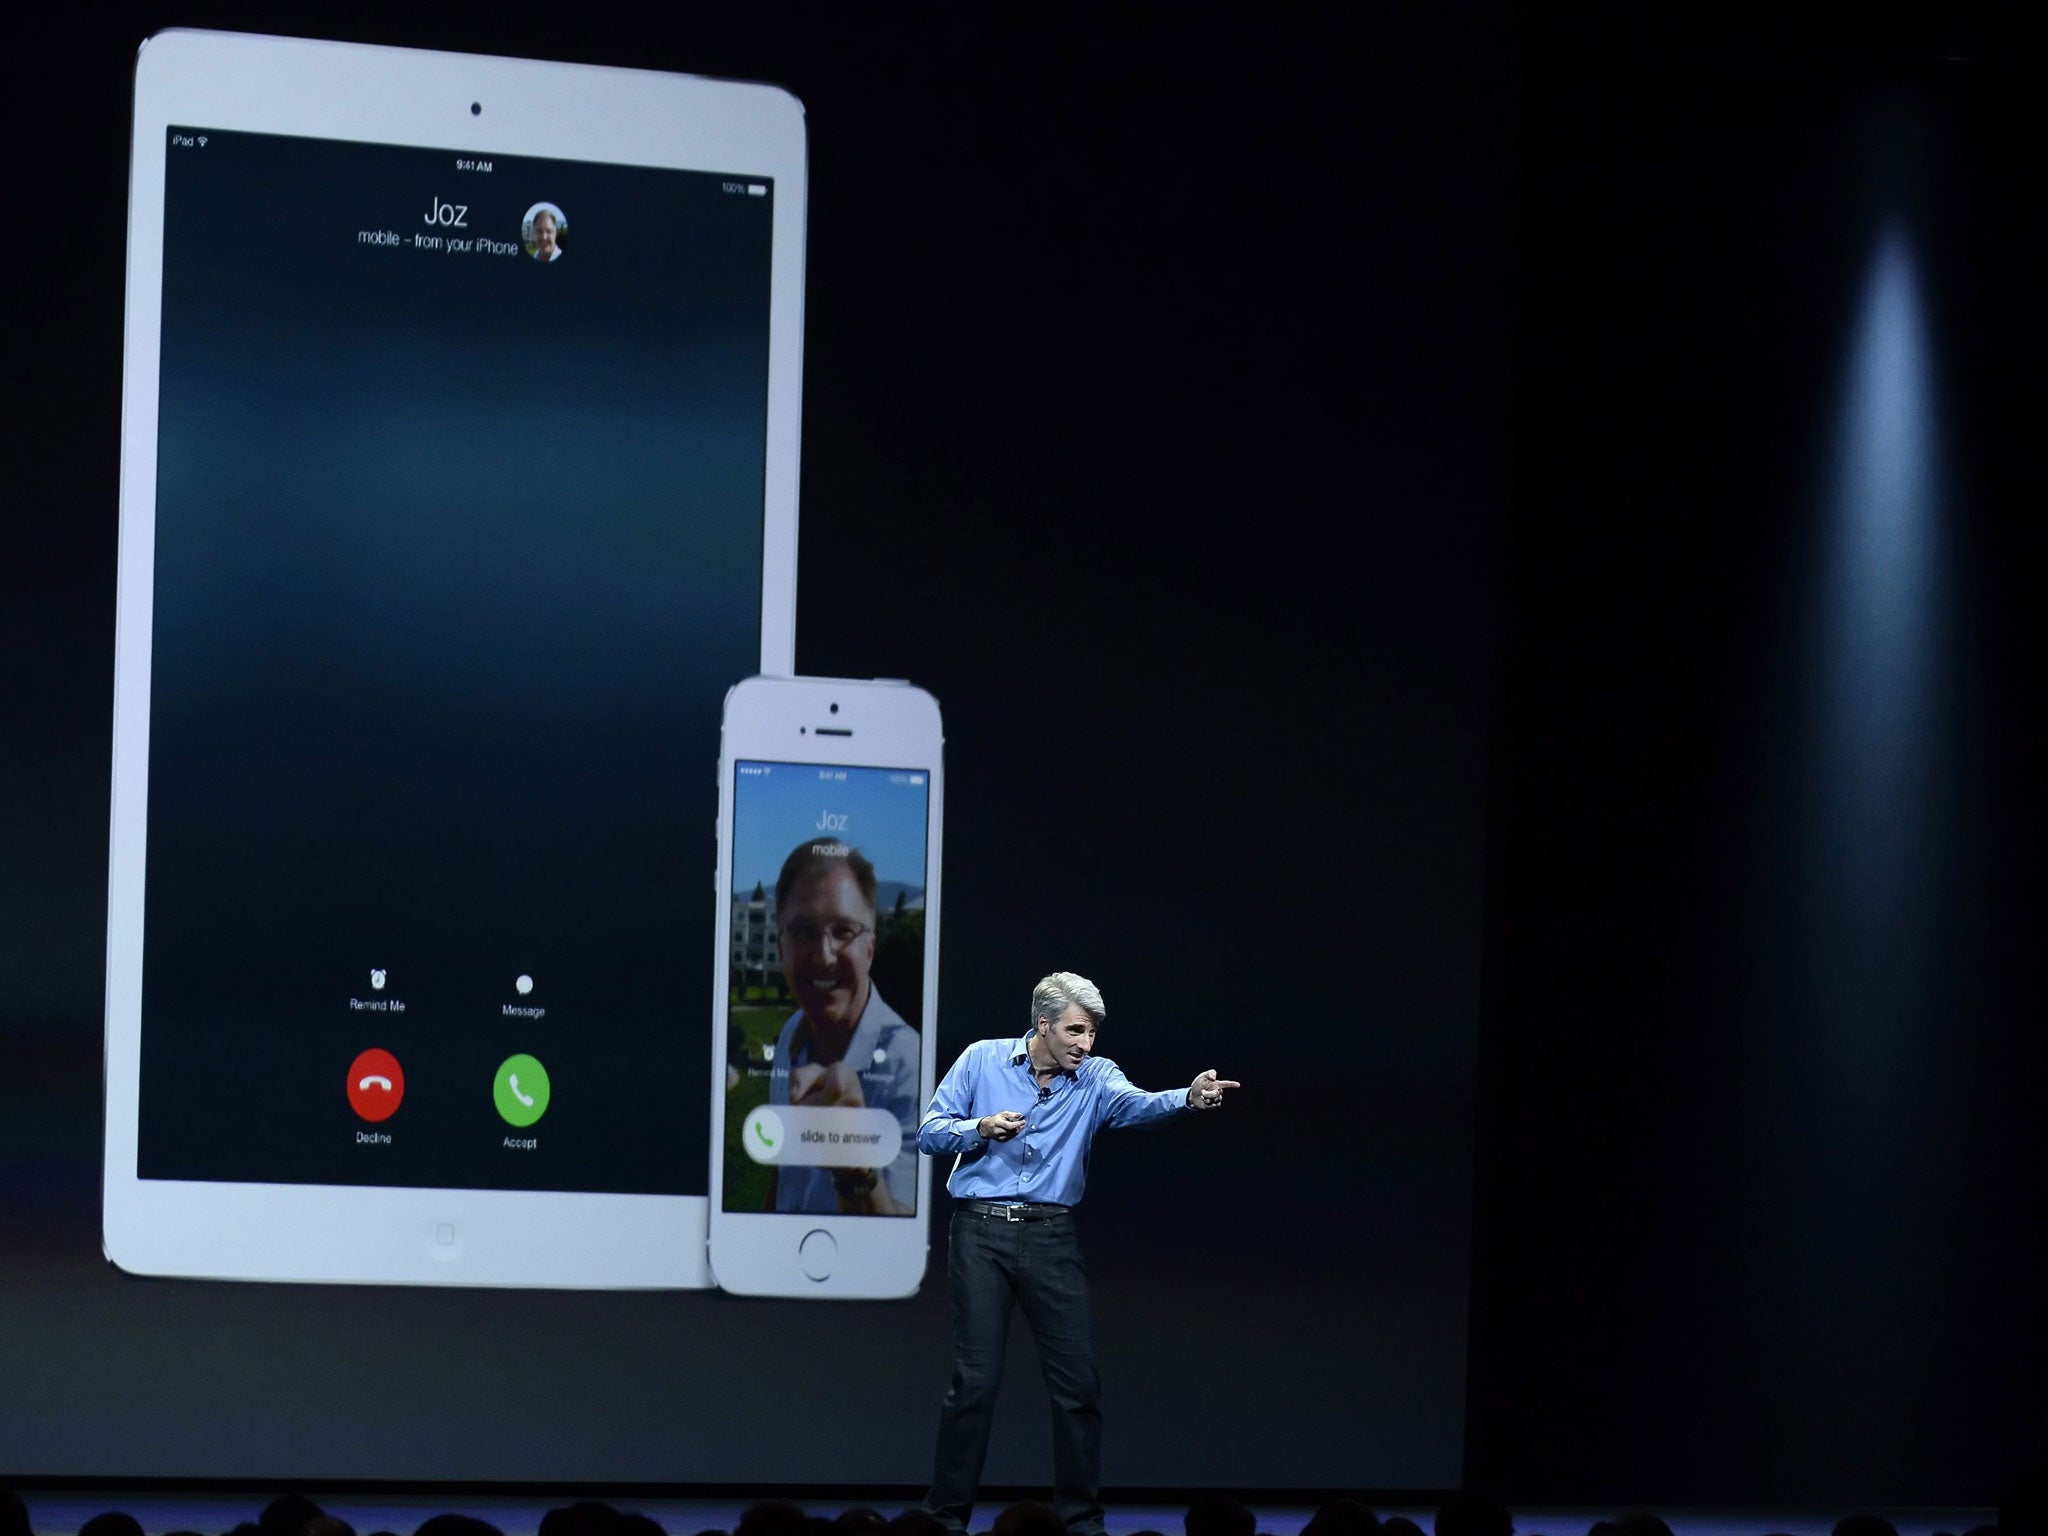 Apple Senior Vice President, Software Engineering Craig Federighi talks about some of the features in the new iOS 8 mobile operating system at the Apple Worldwide Developers Conference (WWDC) 2014